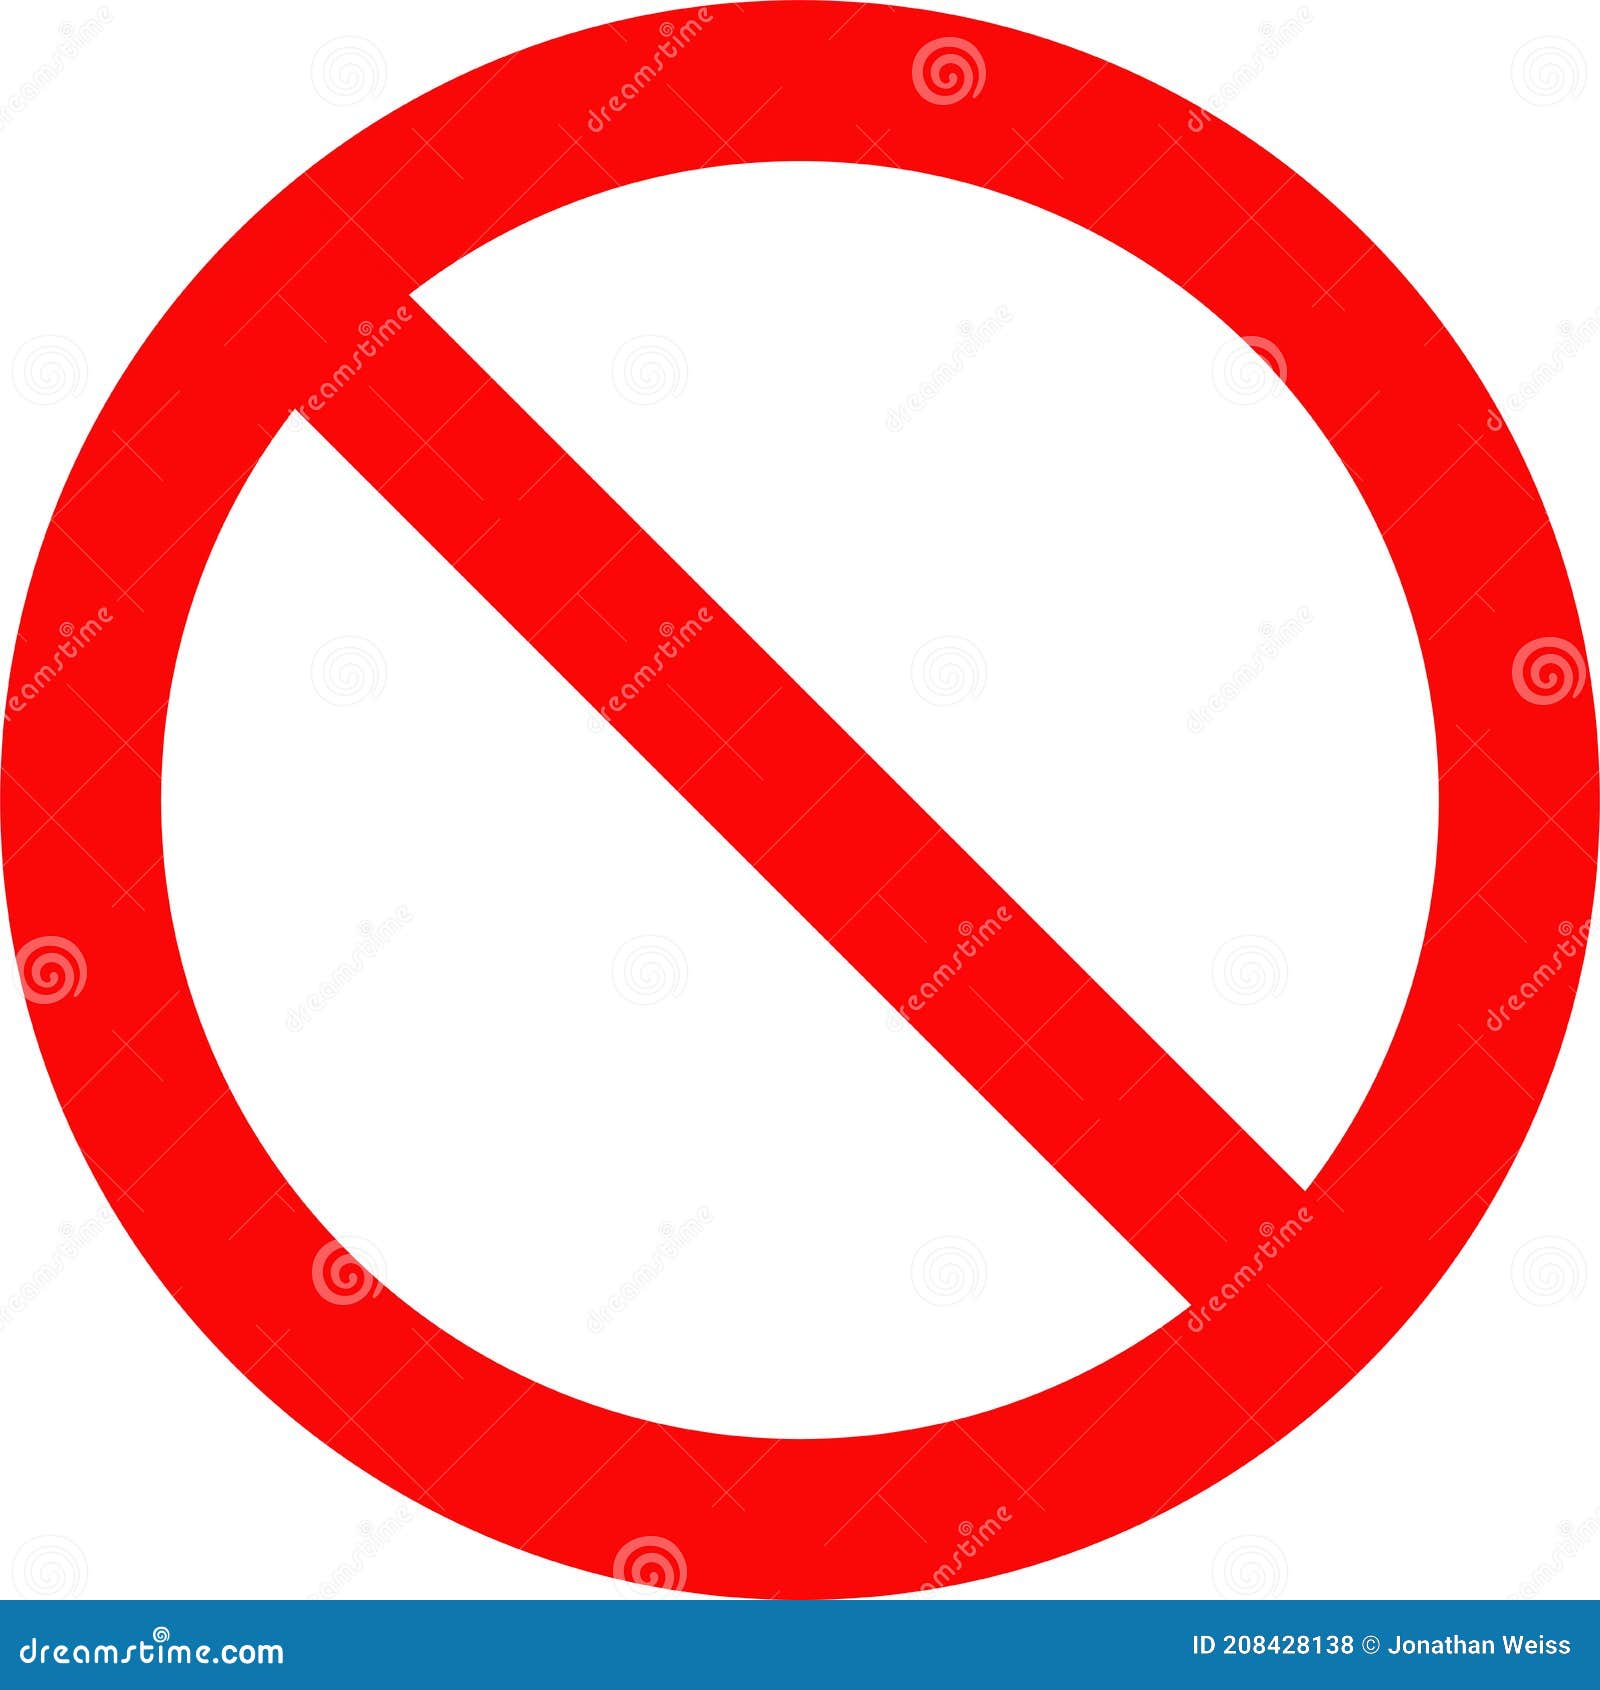 Prohibited And Forbidden No Red Circle With Slash Sign With White Bed And Isolated On A